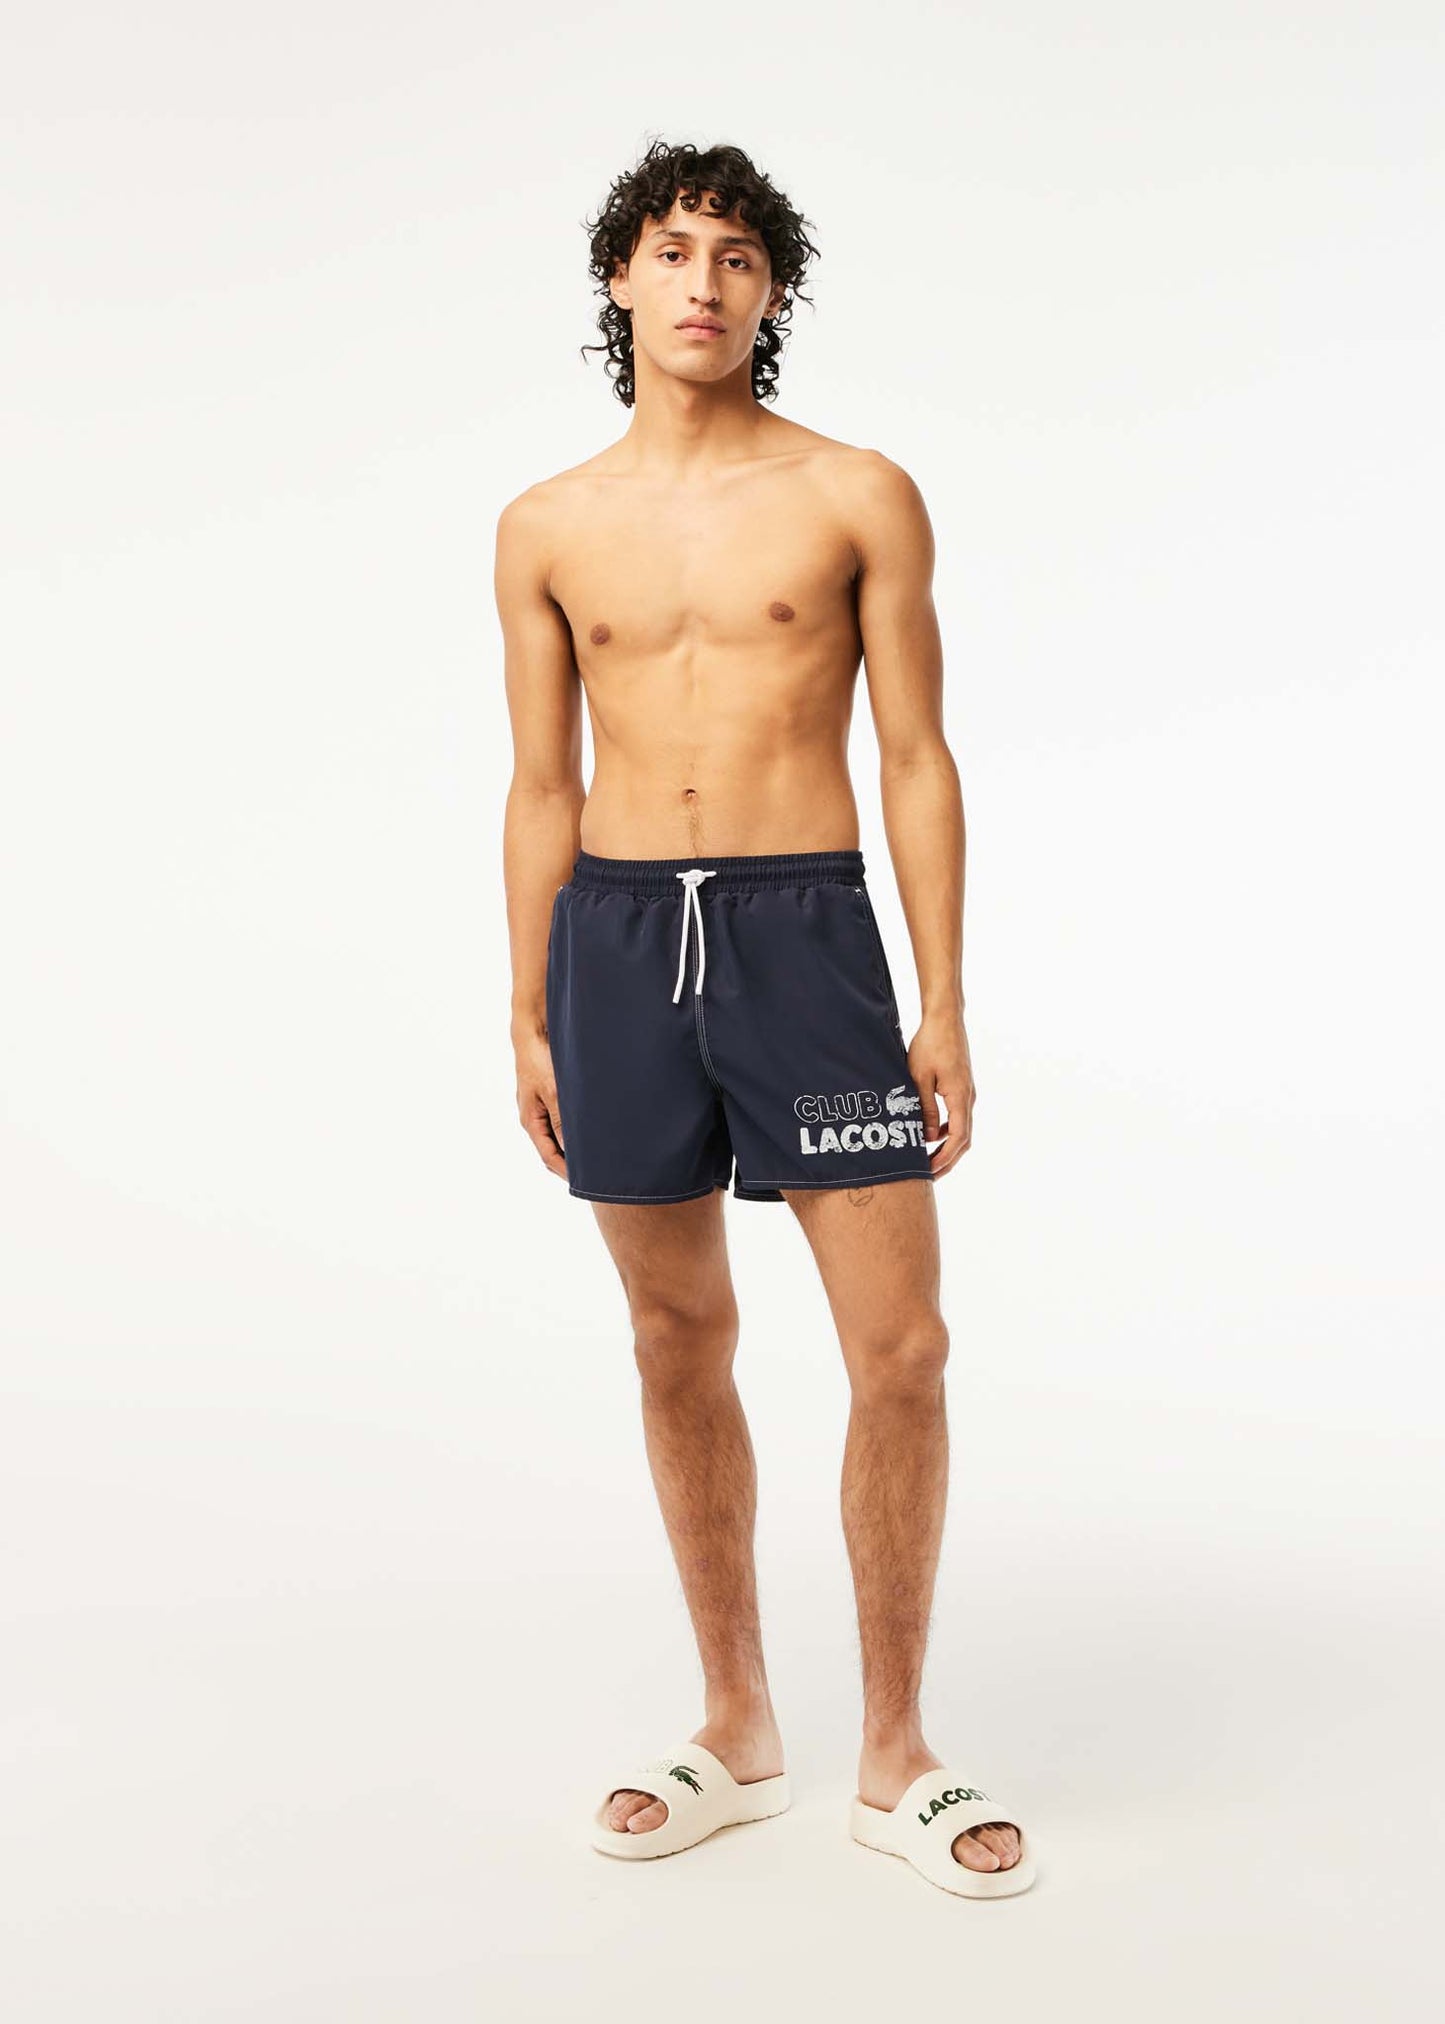 Club lacoste swimming trunks - navy blue